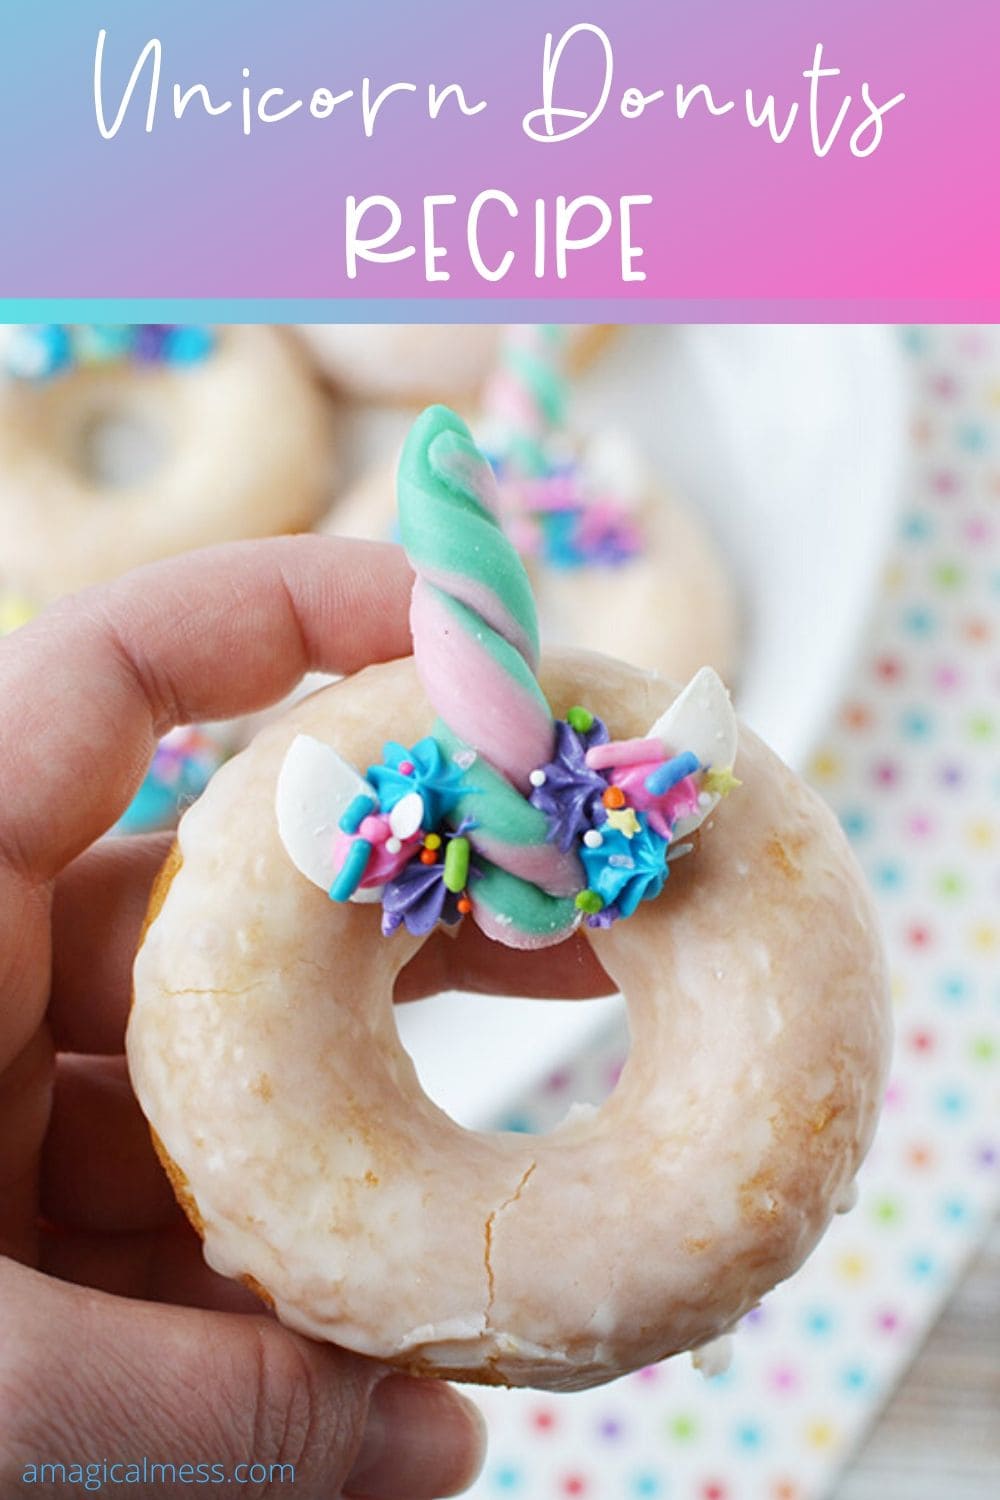 holding a unicorn donut with a candy horn